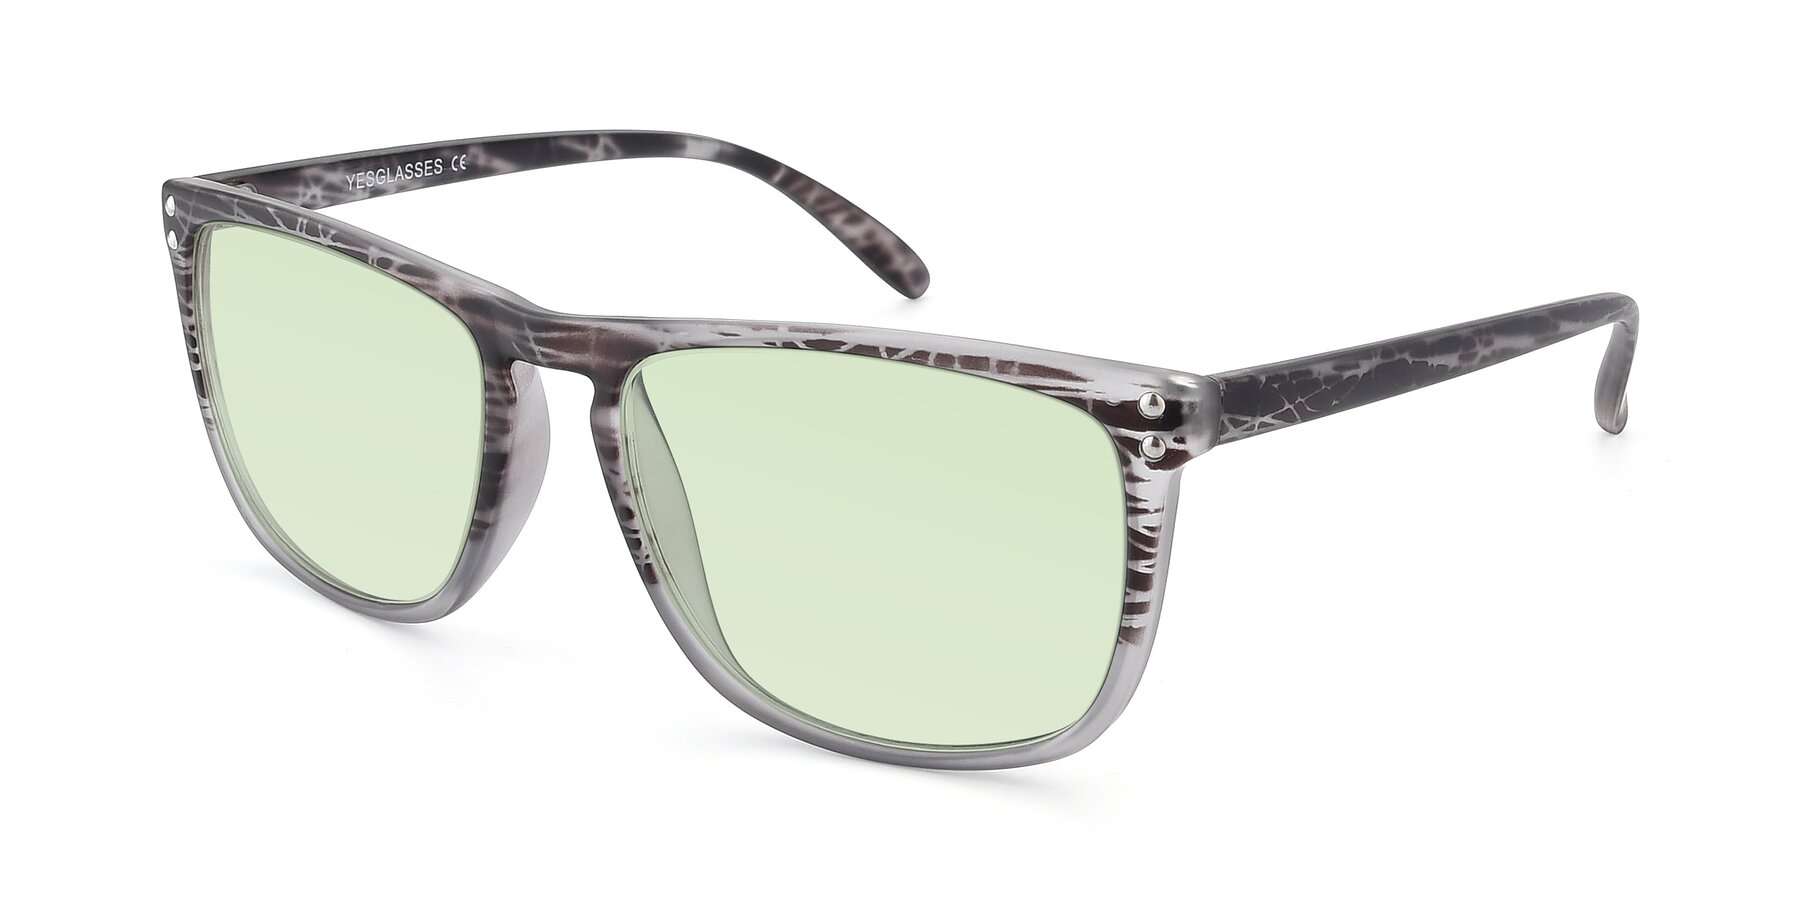 Angle of SSR411 in Translucent Floral Grey with Light Green Tinted Lenses